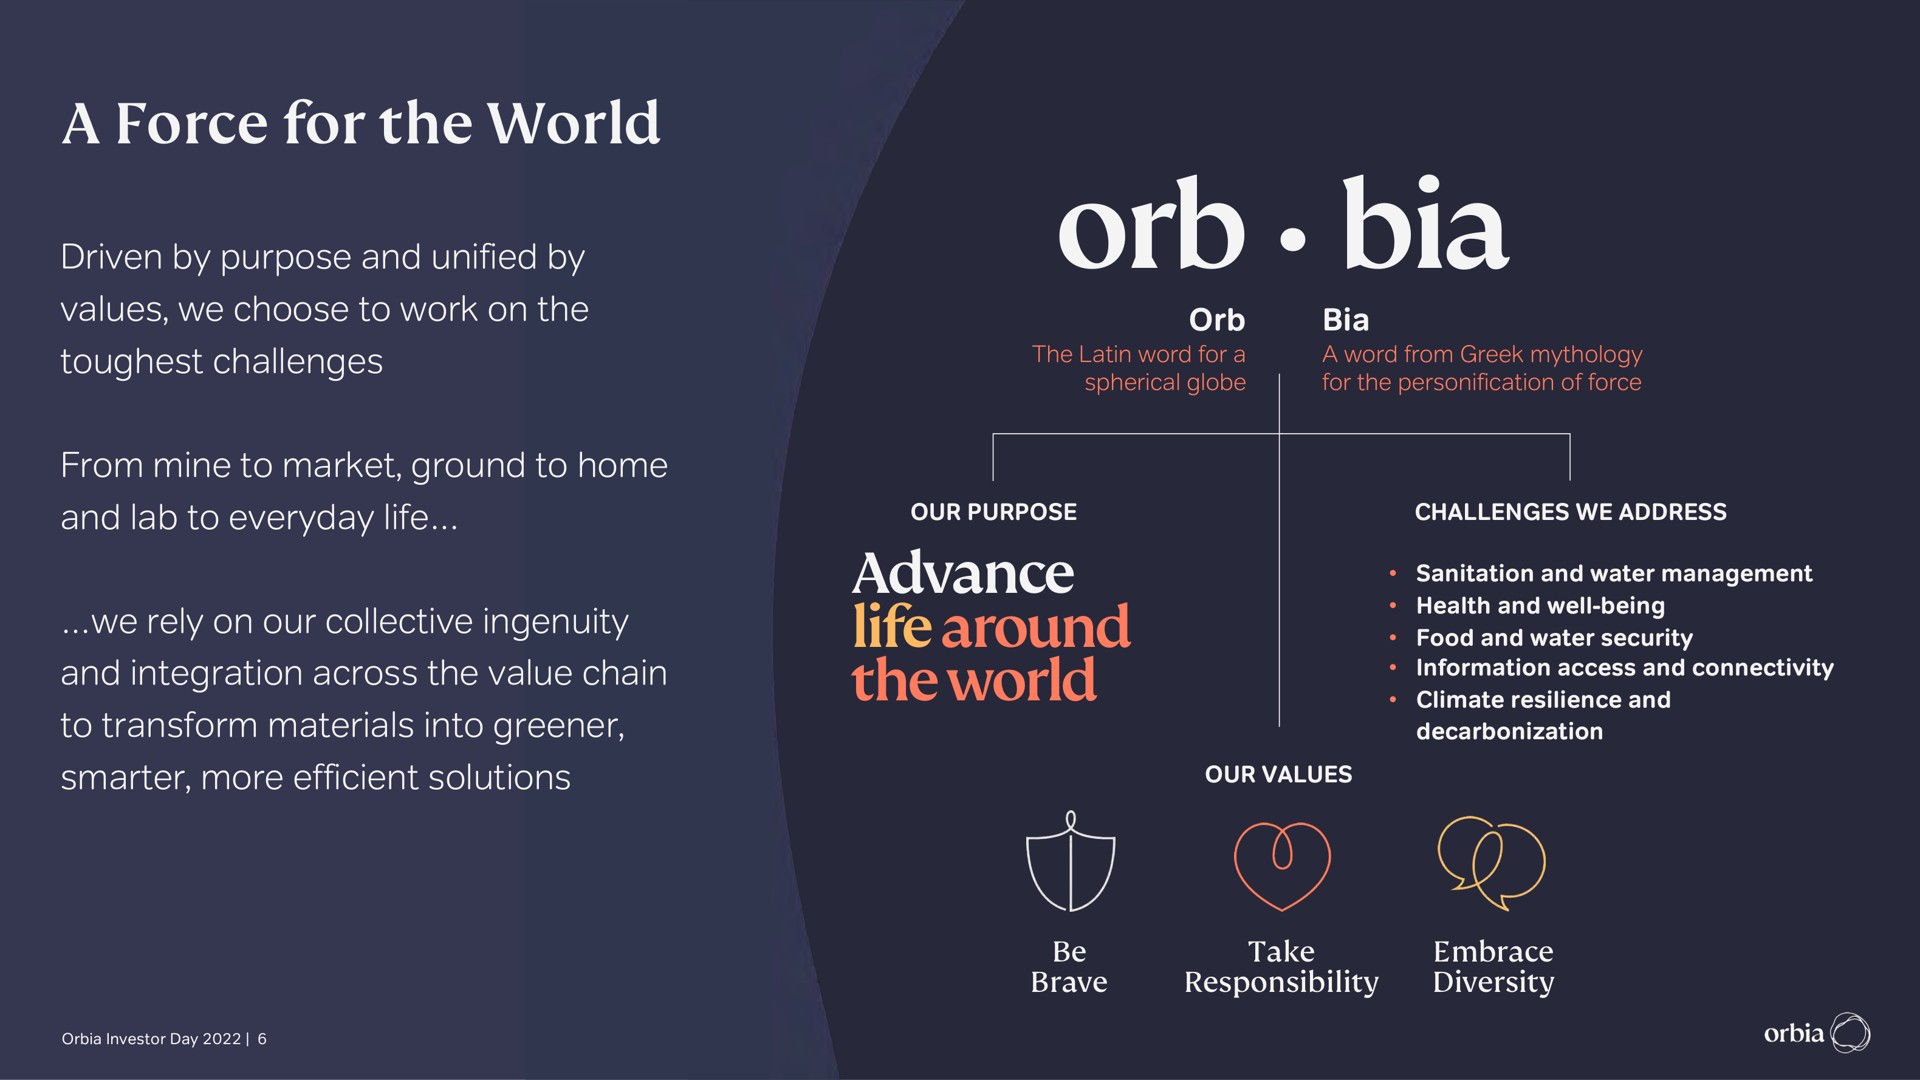 a force for the world orb advance life around the world | Orbia